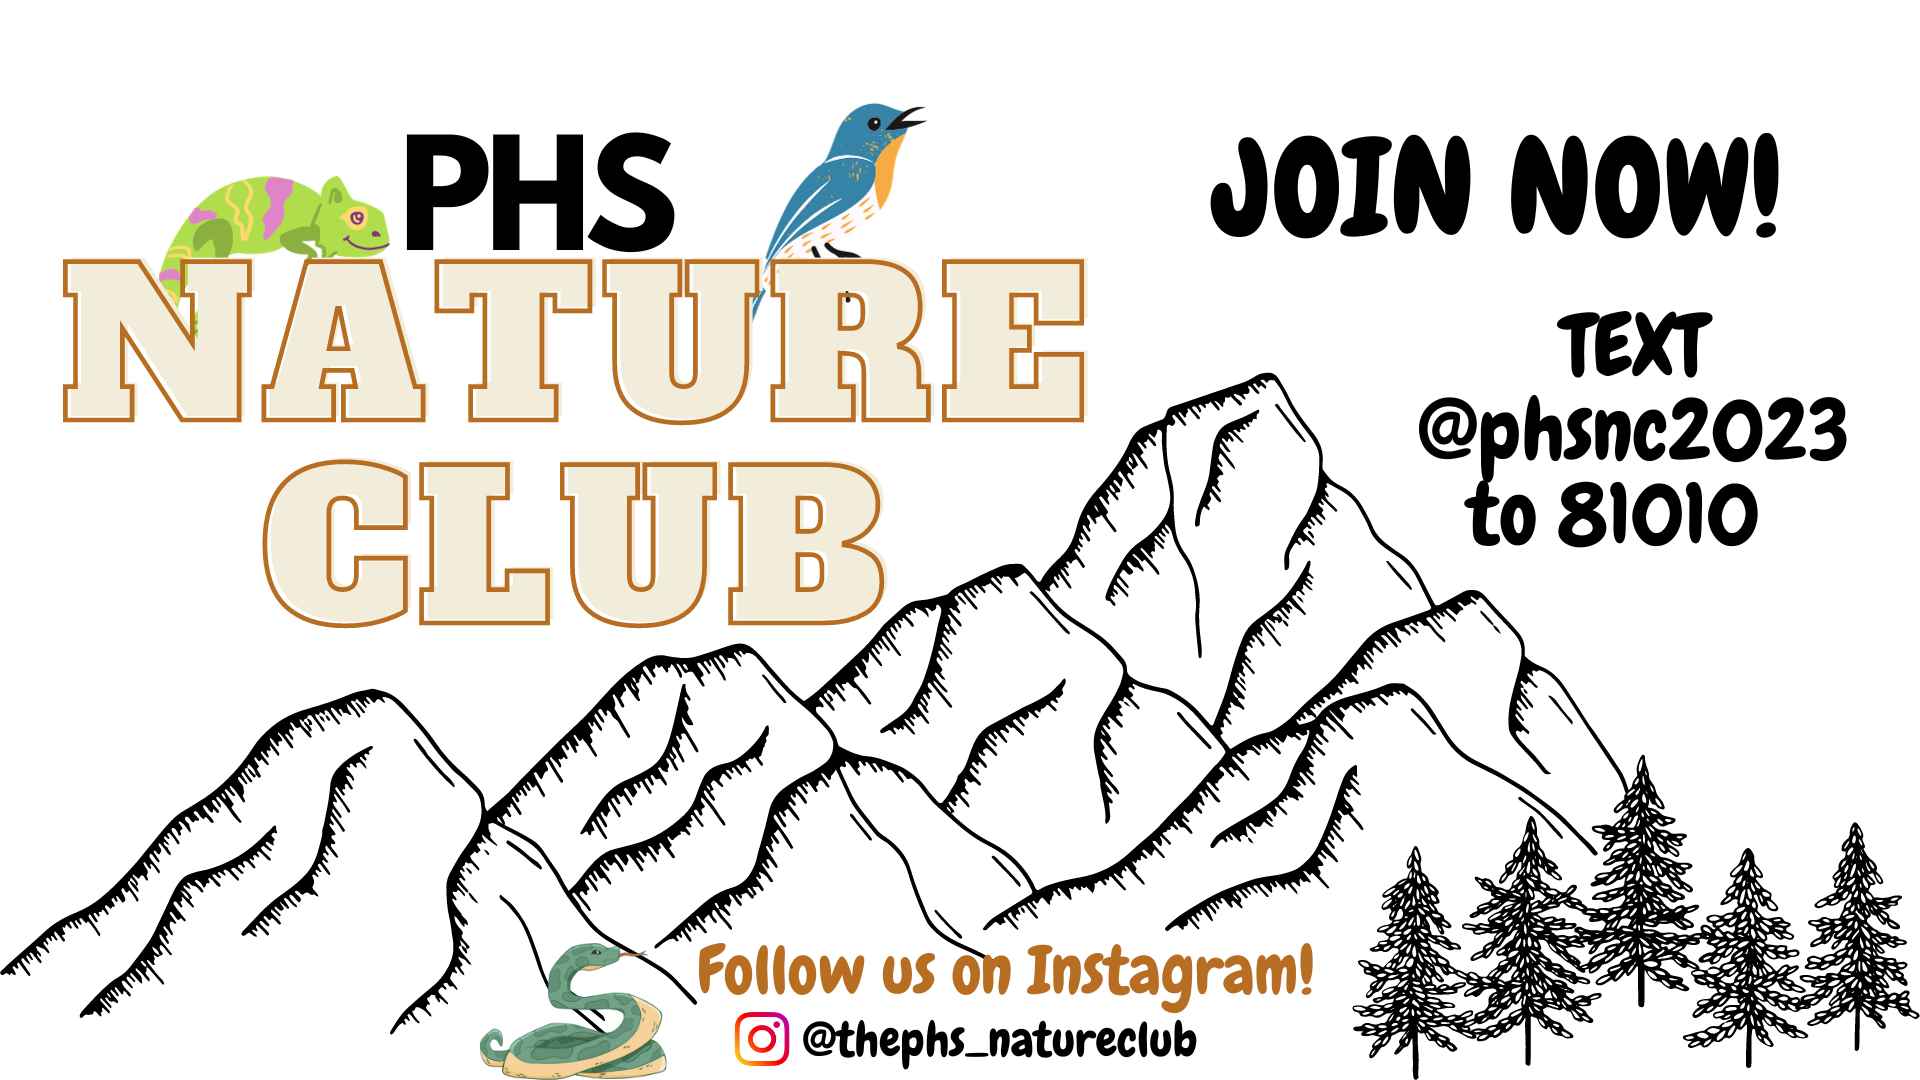 This Canva illustration promotes how to join Nature Club.